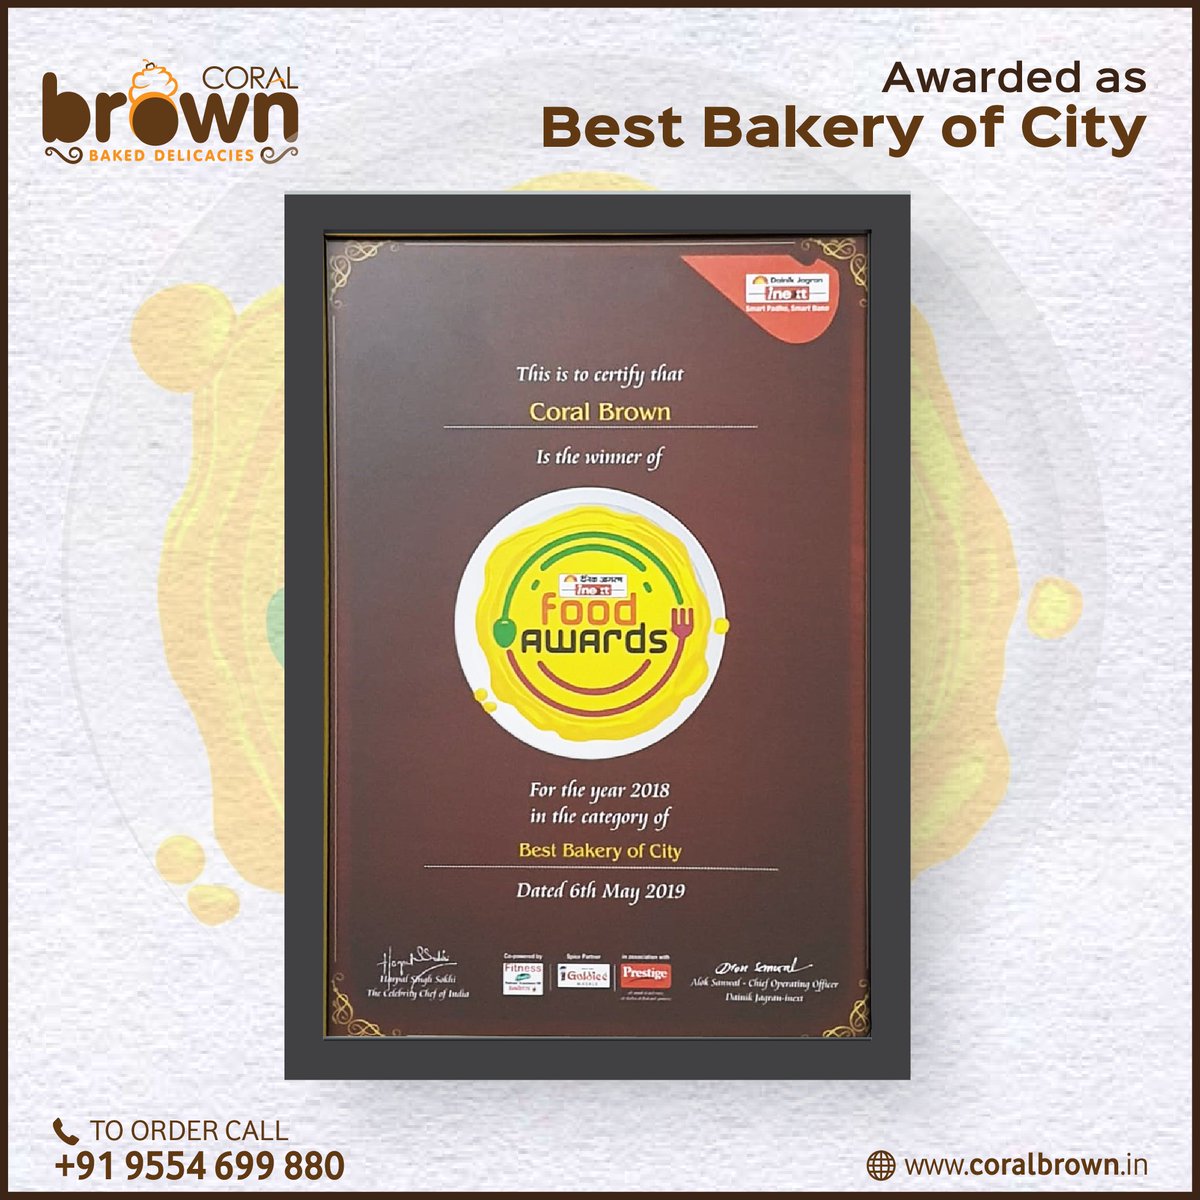 Mr. Khalid Ansari received the 'Best Bakery of City' Award for Coral Brown by Chef Harpal Singh Sokhi in the Dainik Jagran i-next Food Awards 2019.

To Order: +91 9554699880 
#Zomato: bit.ly/2Lrm9se 
#Swiggy: bit.ly/2LrwyDU

#CoralBrown #coralgroup